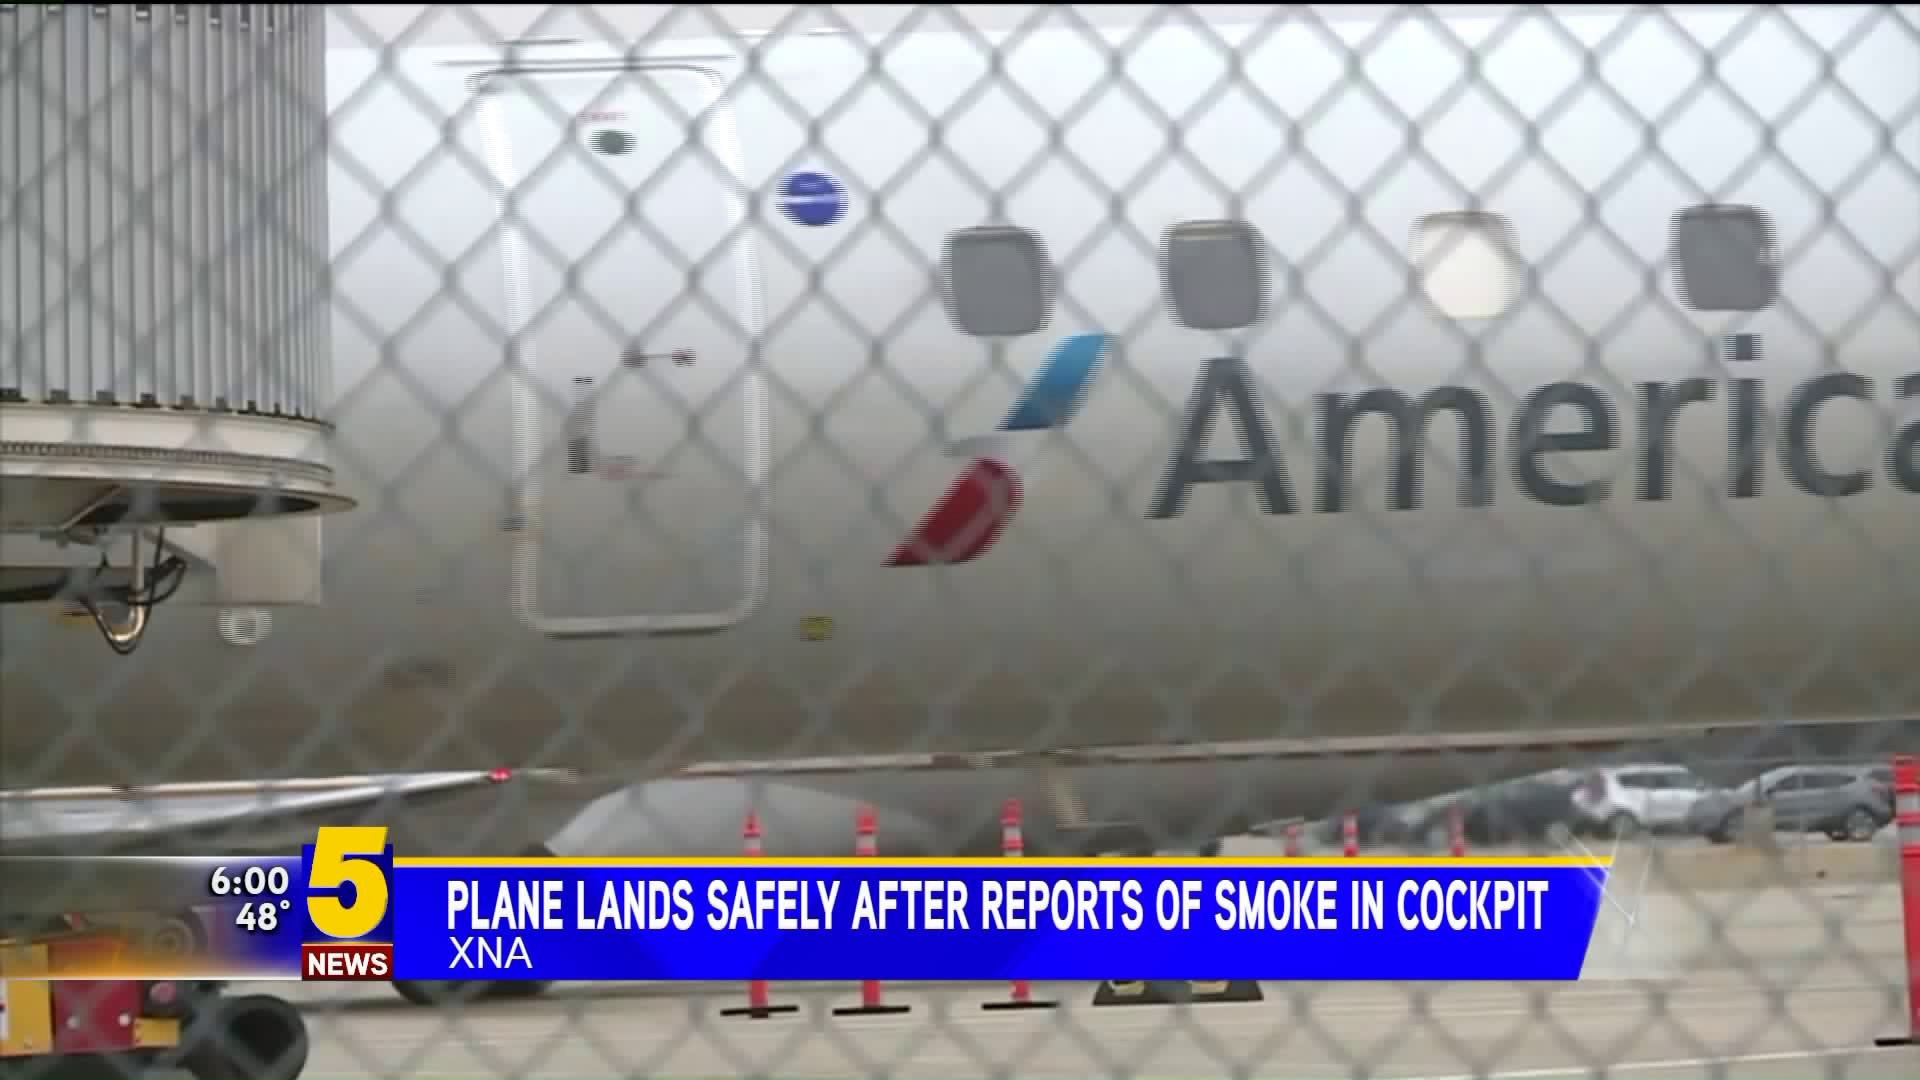 Plane Lands Safely At XNA After Reports Of Smoke In Cockpit